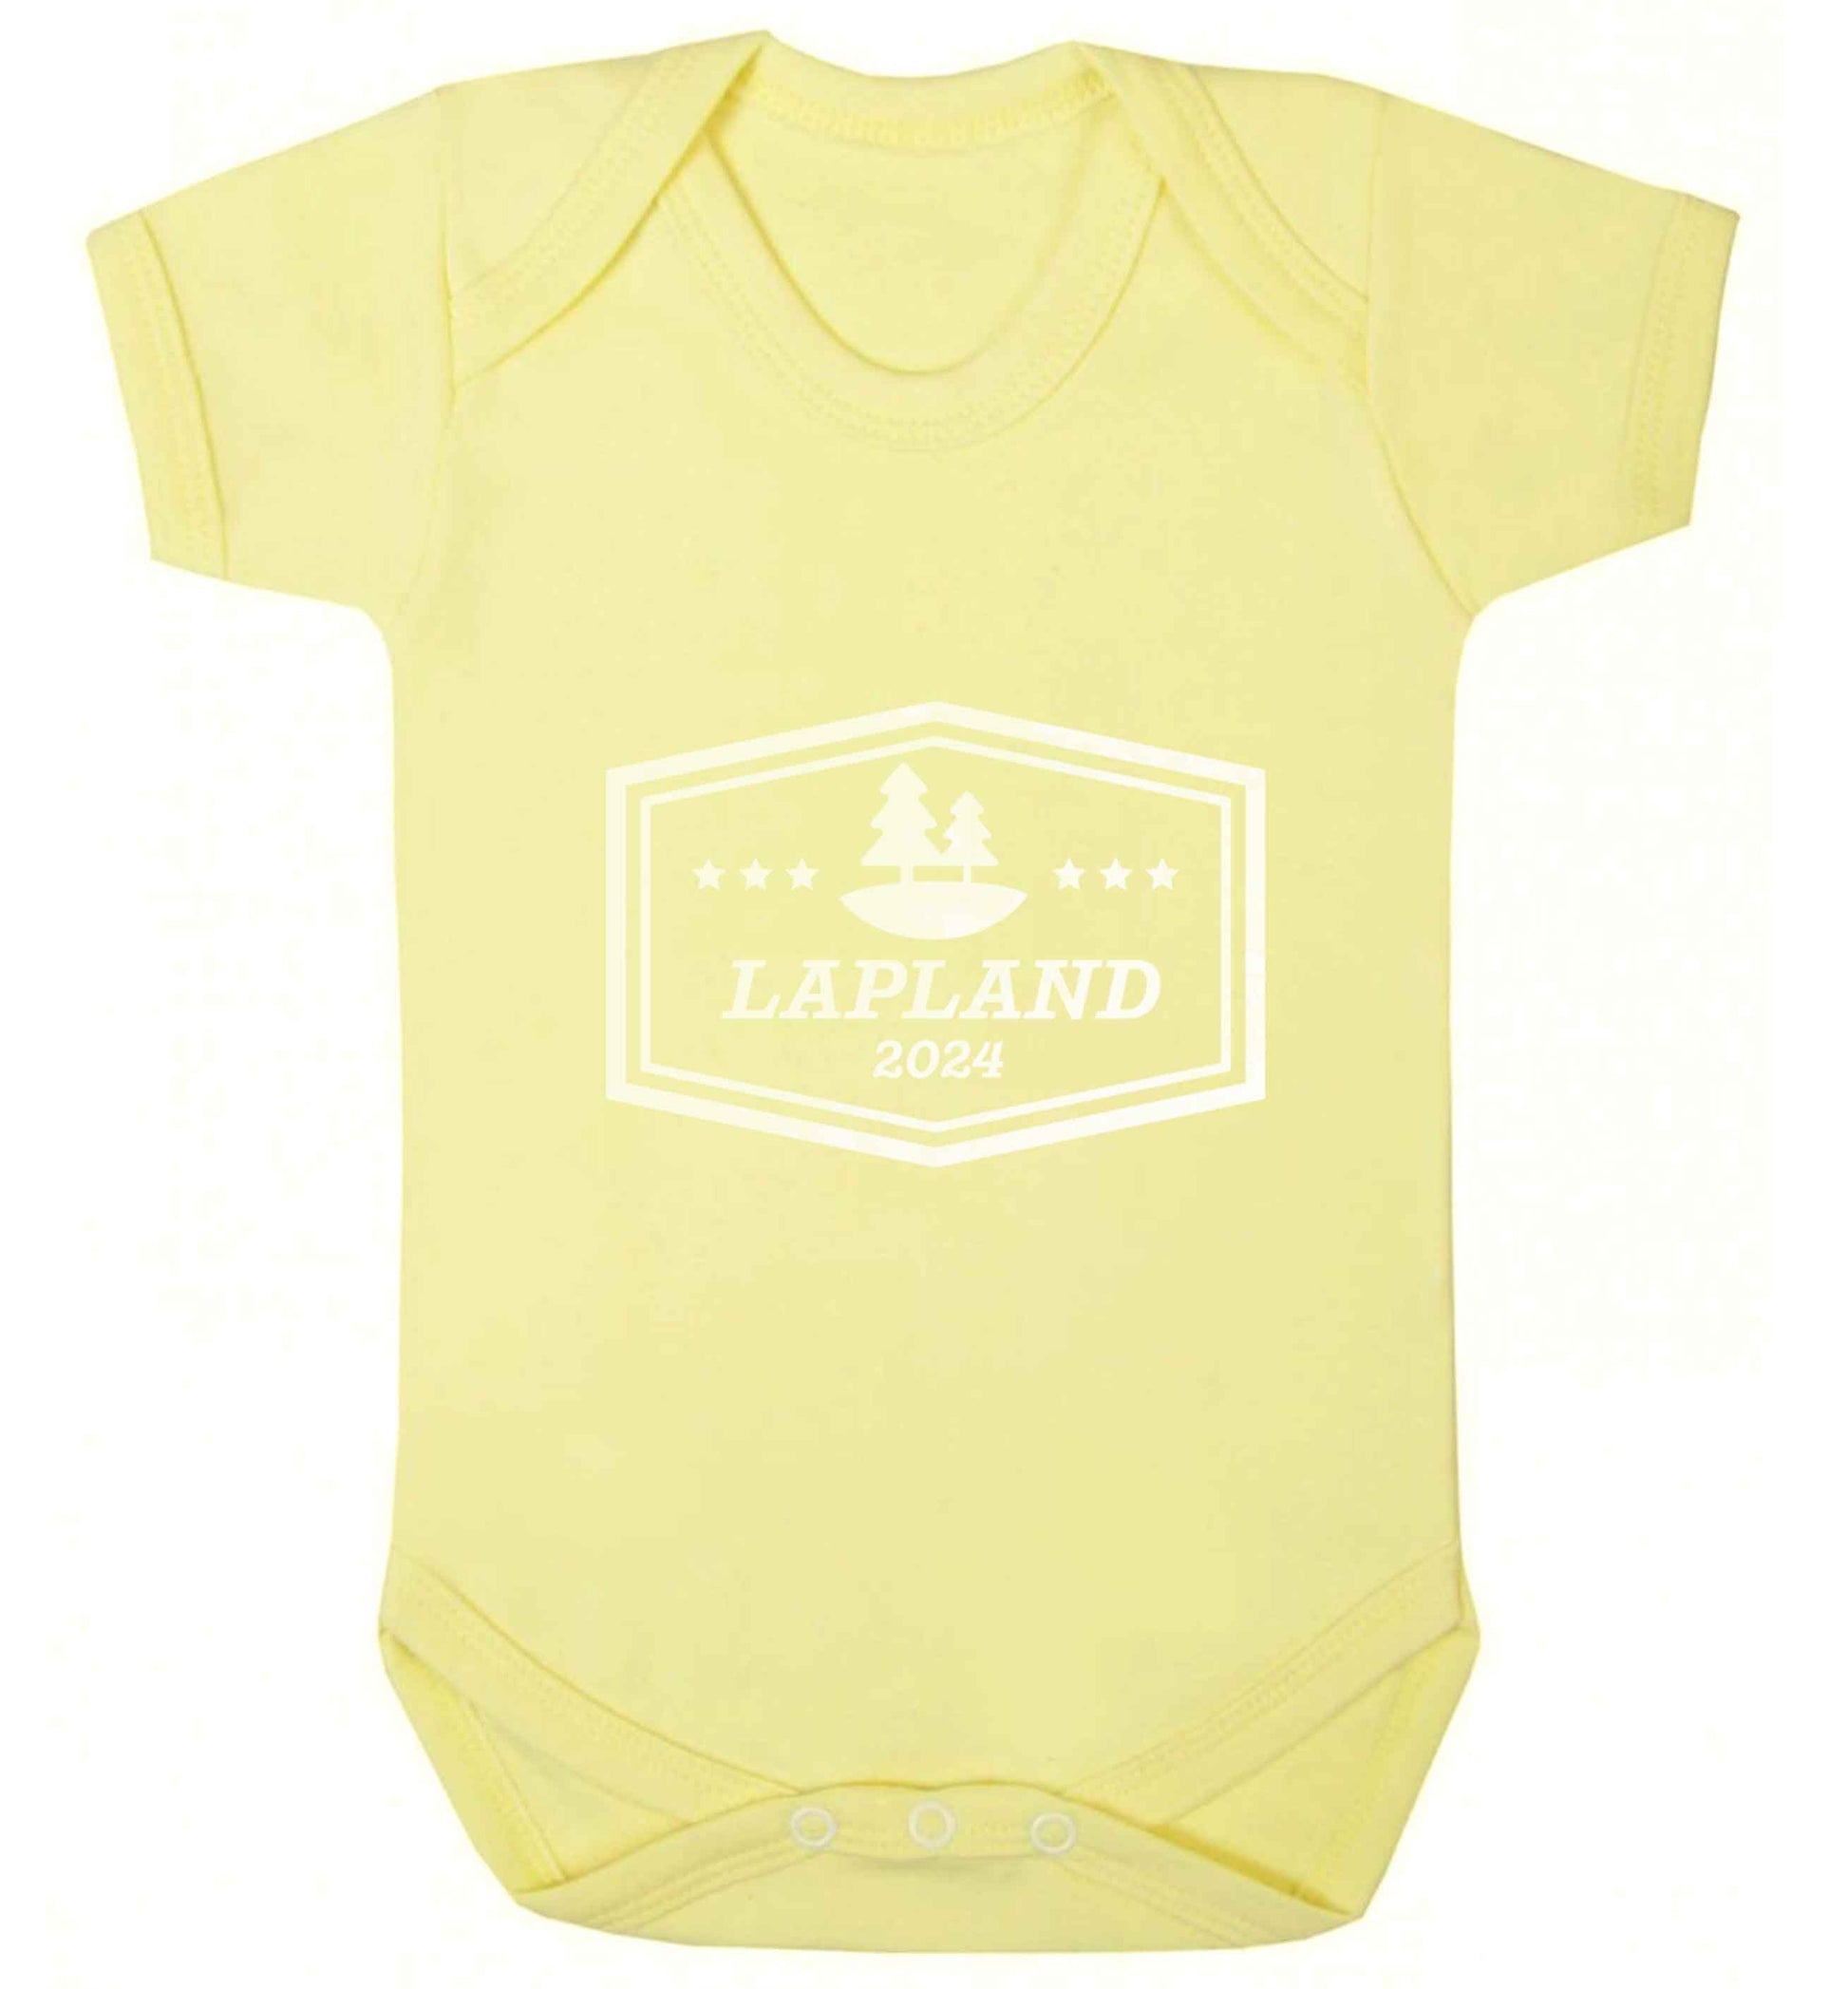 Custom date Lapland baby vest pale yellow 18-24 months